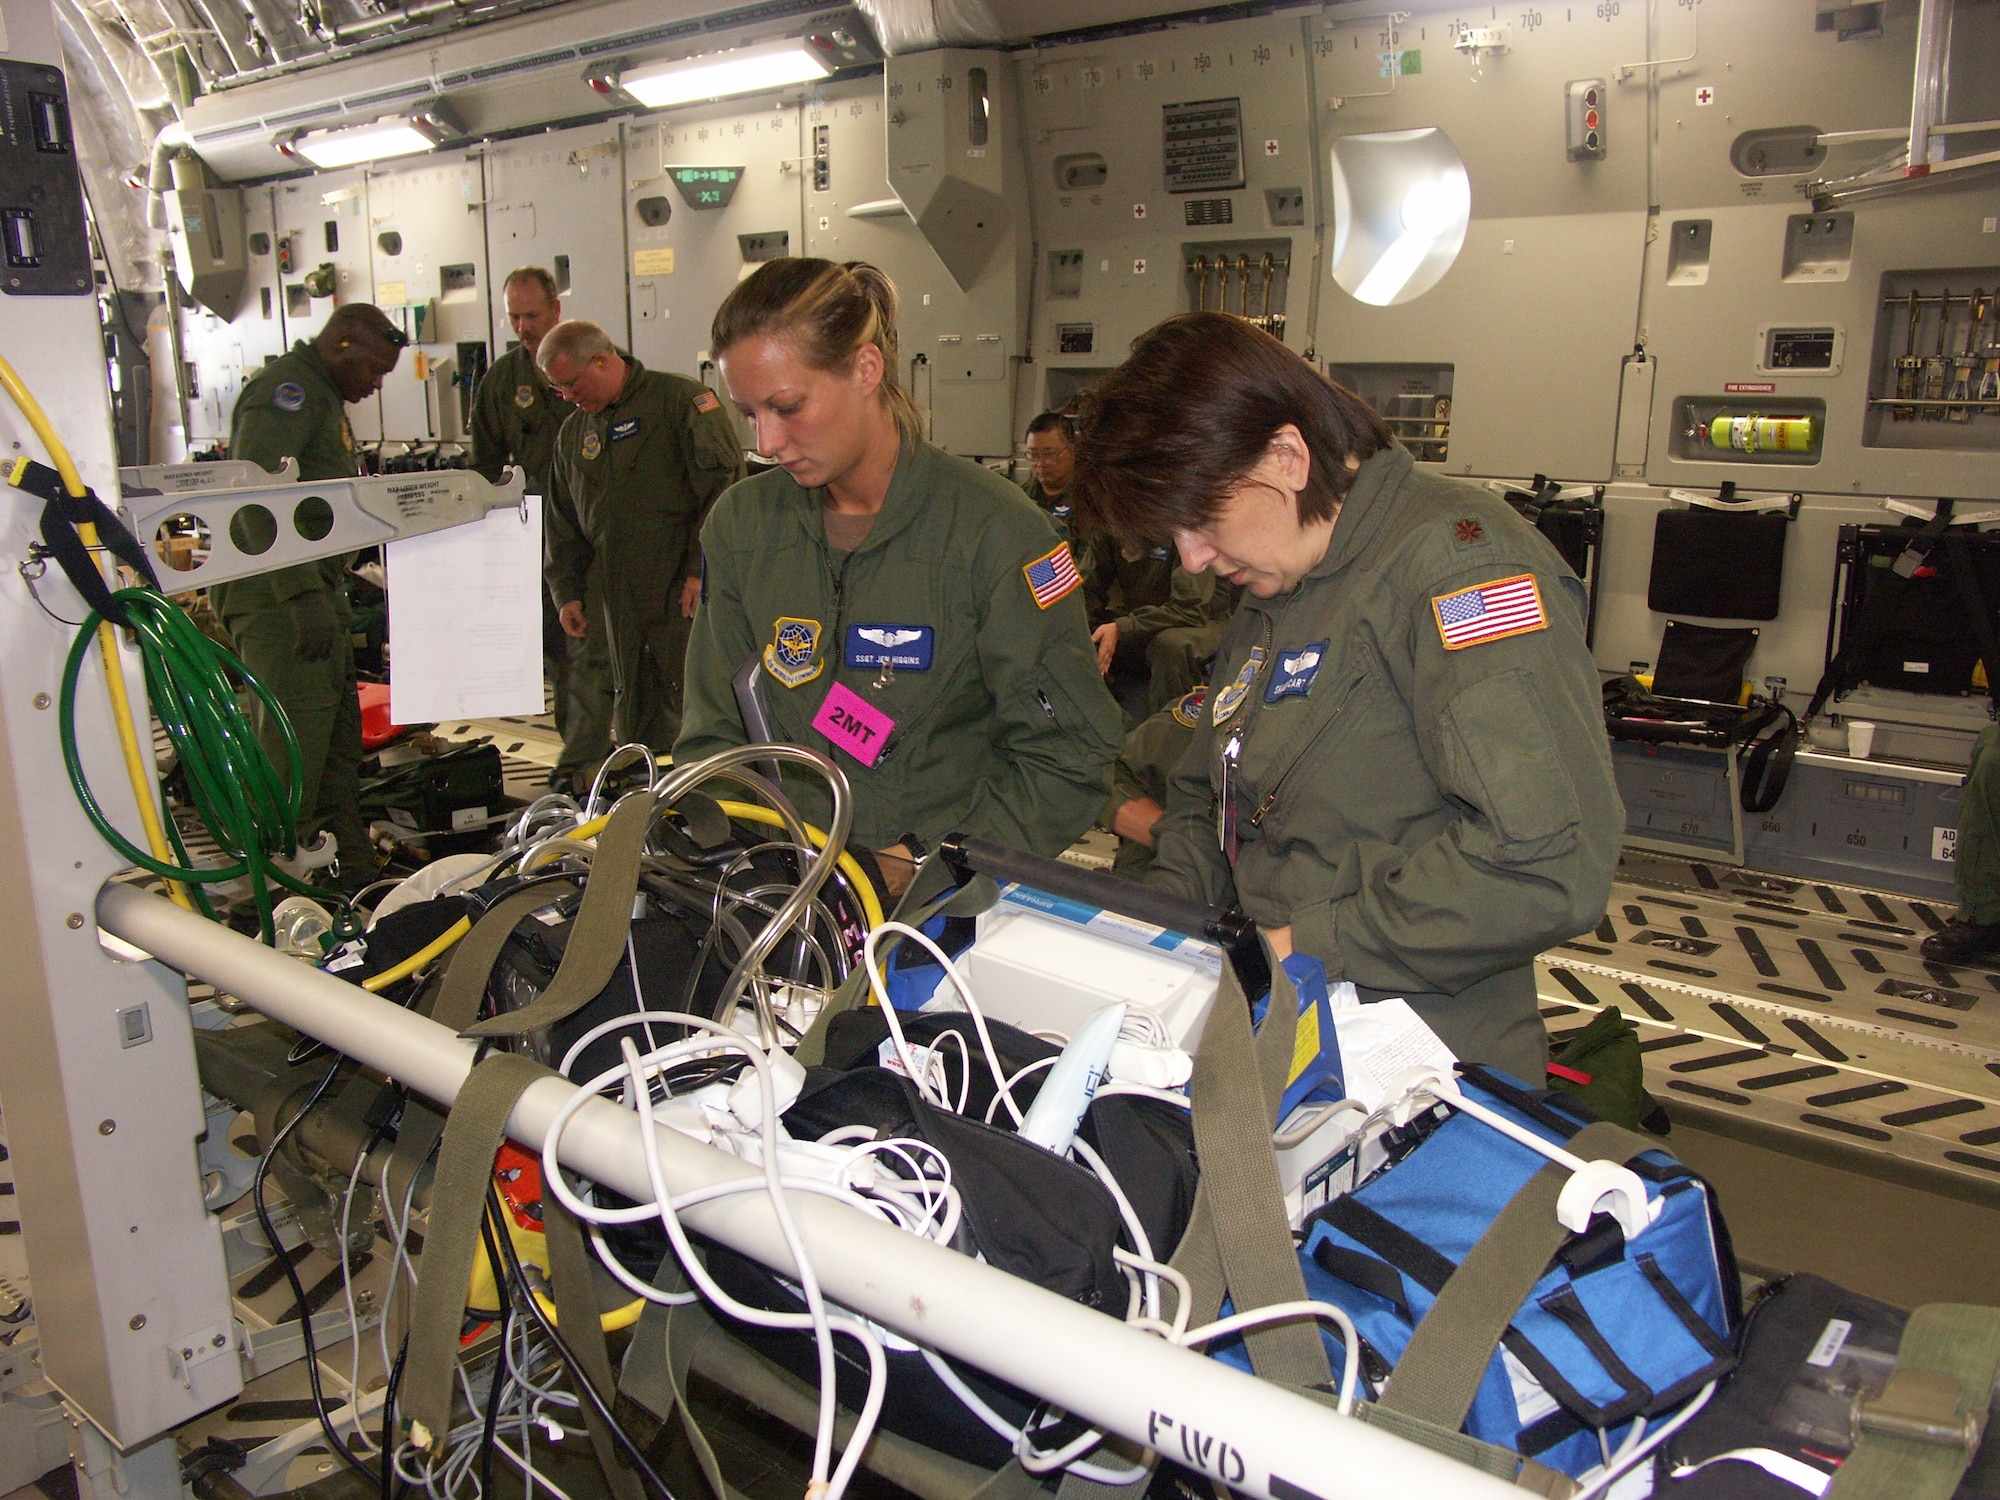 Two 932nd Aeromedical Evacuation Squadron members, Staff Sgt. Jennifer Higgins (left) and Maj. Shaun Carter, prepare their medical equipment before a training flight on board a visiting C-17 Globemaster from March Air Reserve Base, Calif.  Photo/Tech. Sgt. Gerald Sonnenberg